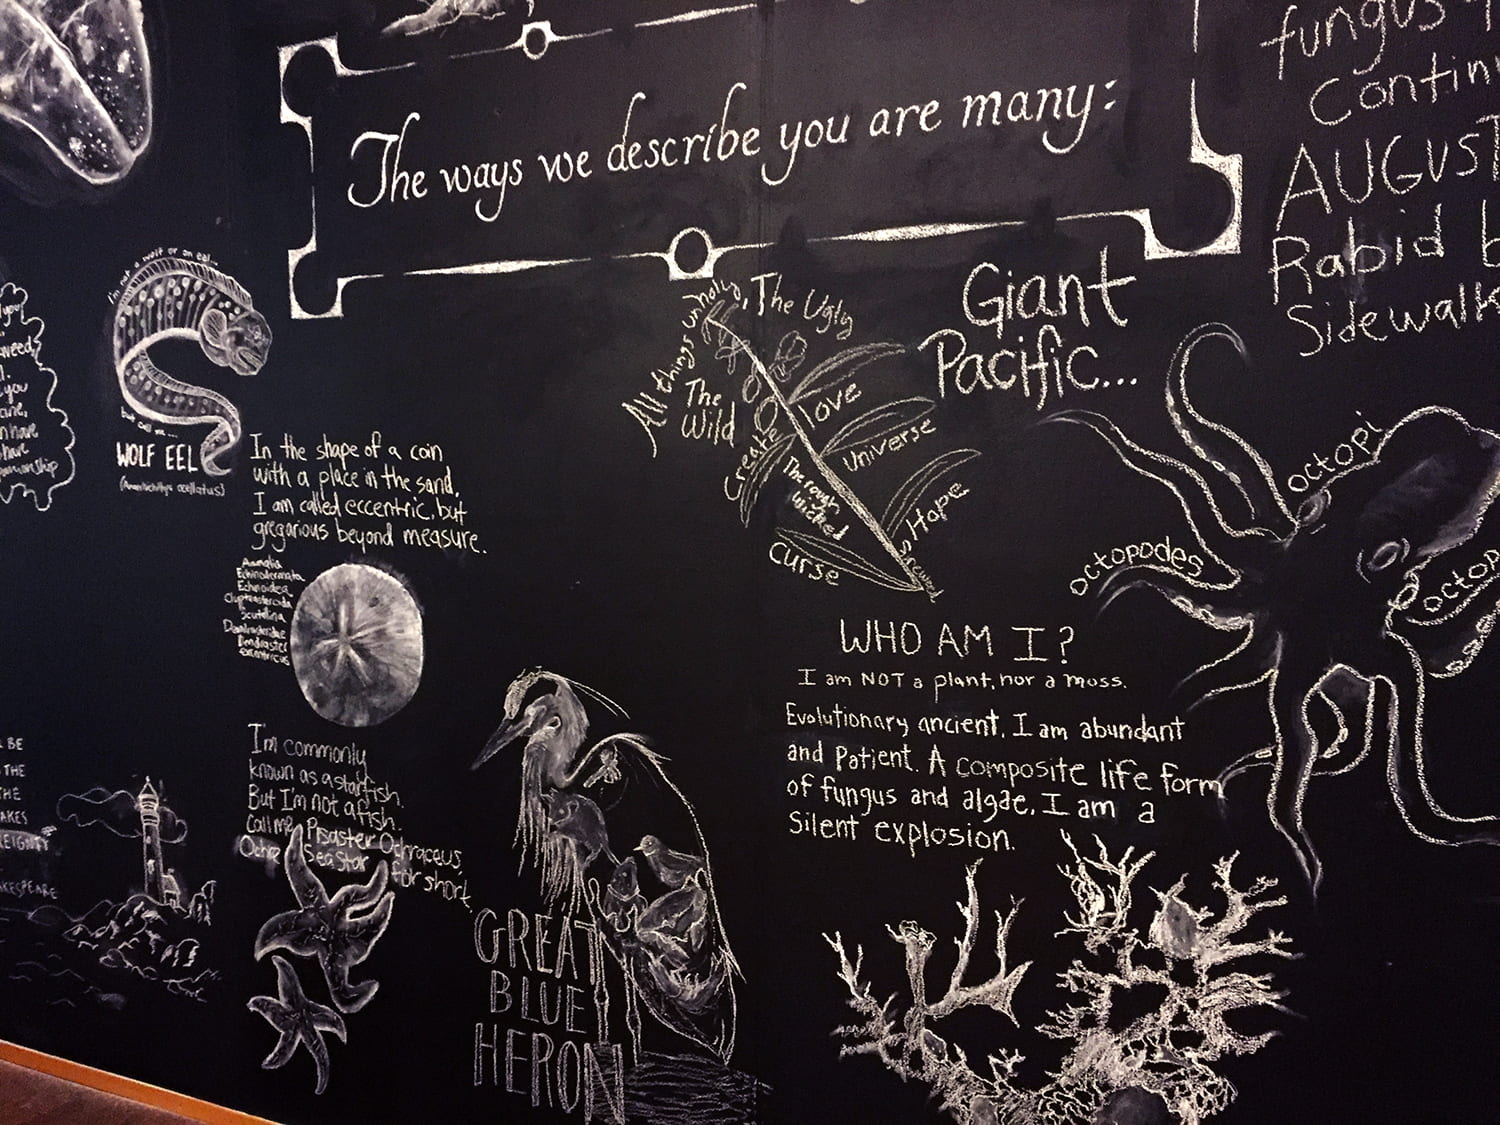 chalkboard drawings and descriptions of: wolf eel, sand dollar, starfish, great blue heron, giant pacific octopus